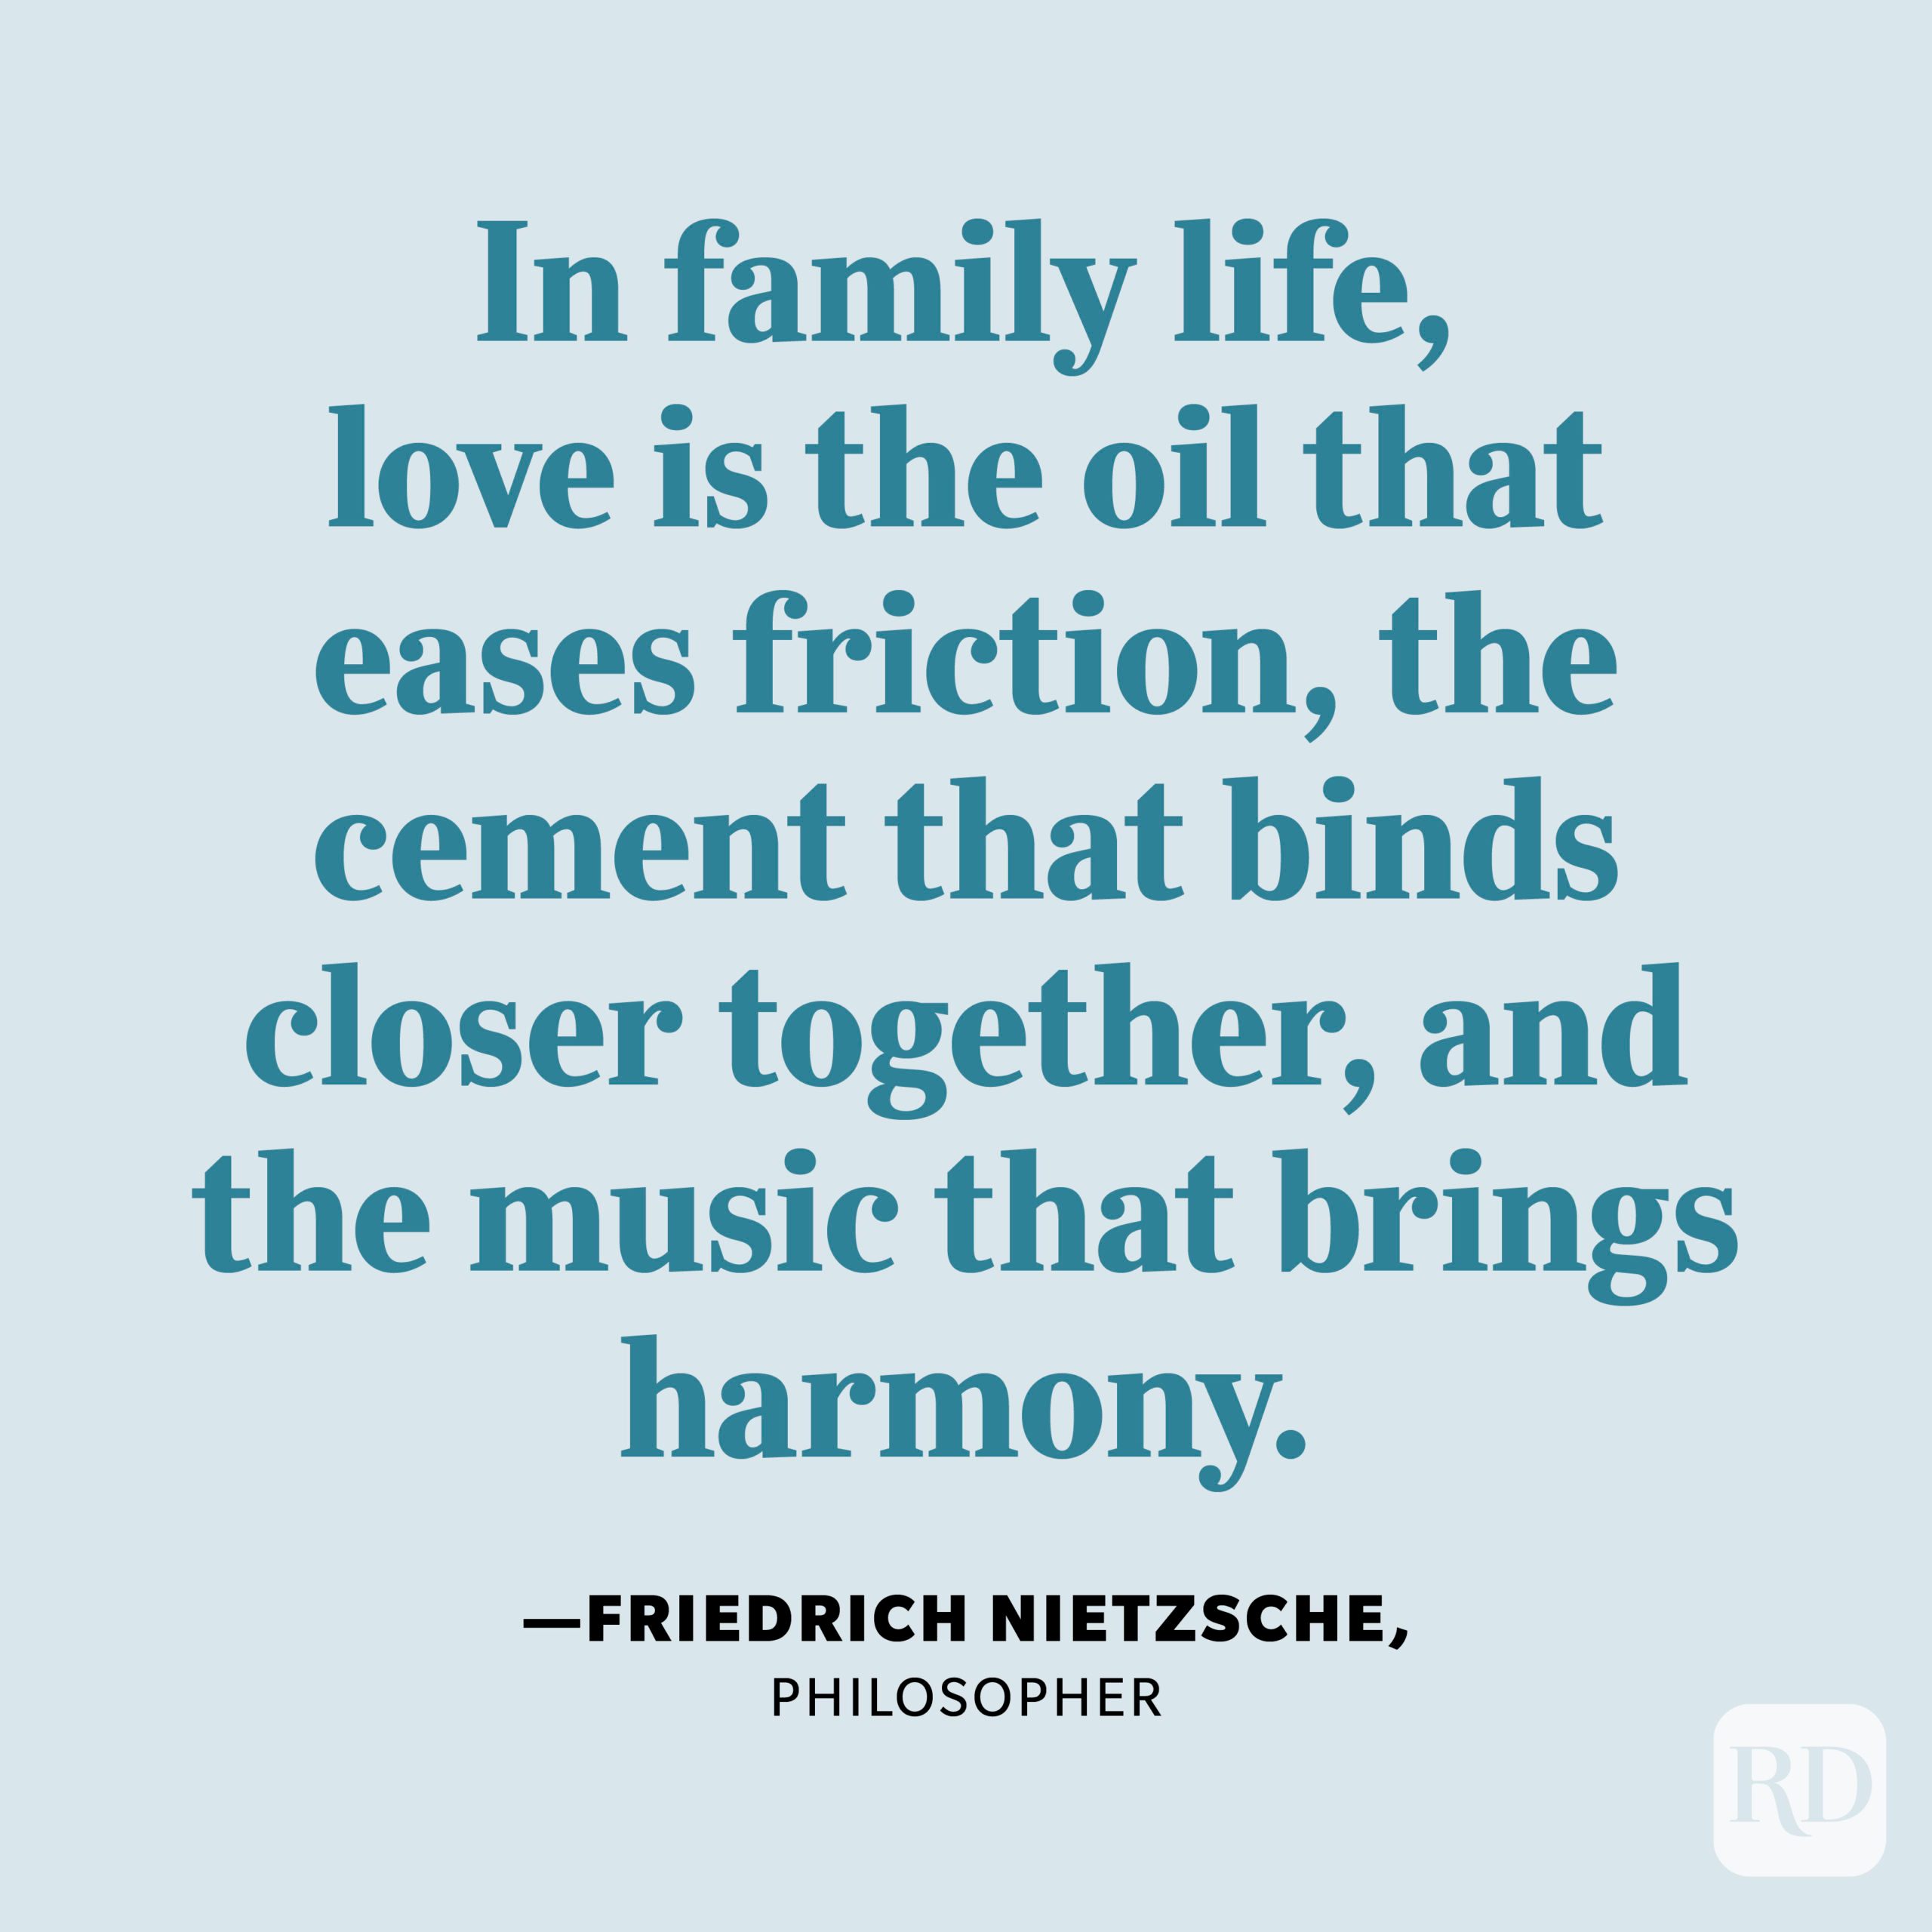 "In family life, love is the oil that eases friction, the cement that binds closer together, and the music that brings harmony." —Friedrich Nietzsche, philosopher